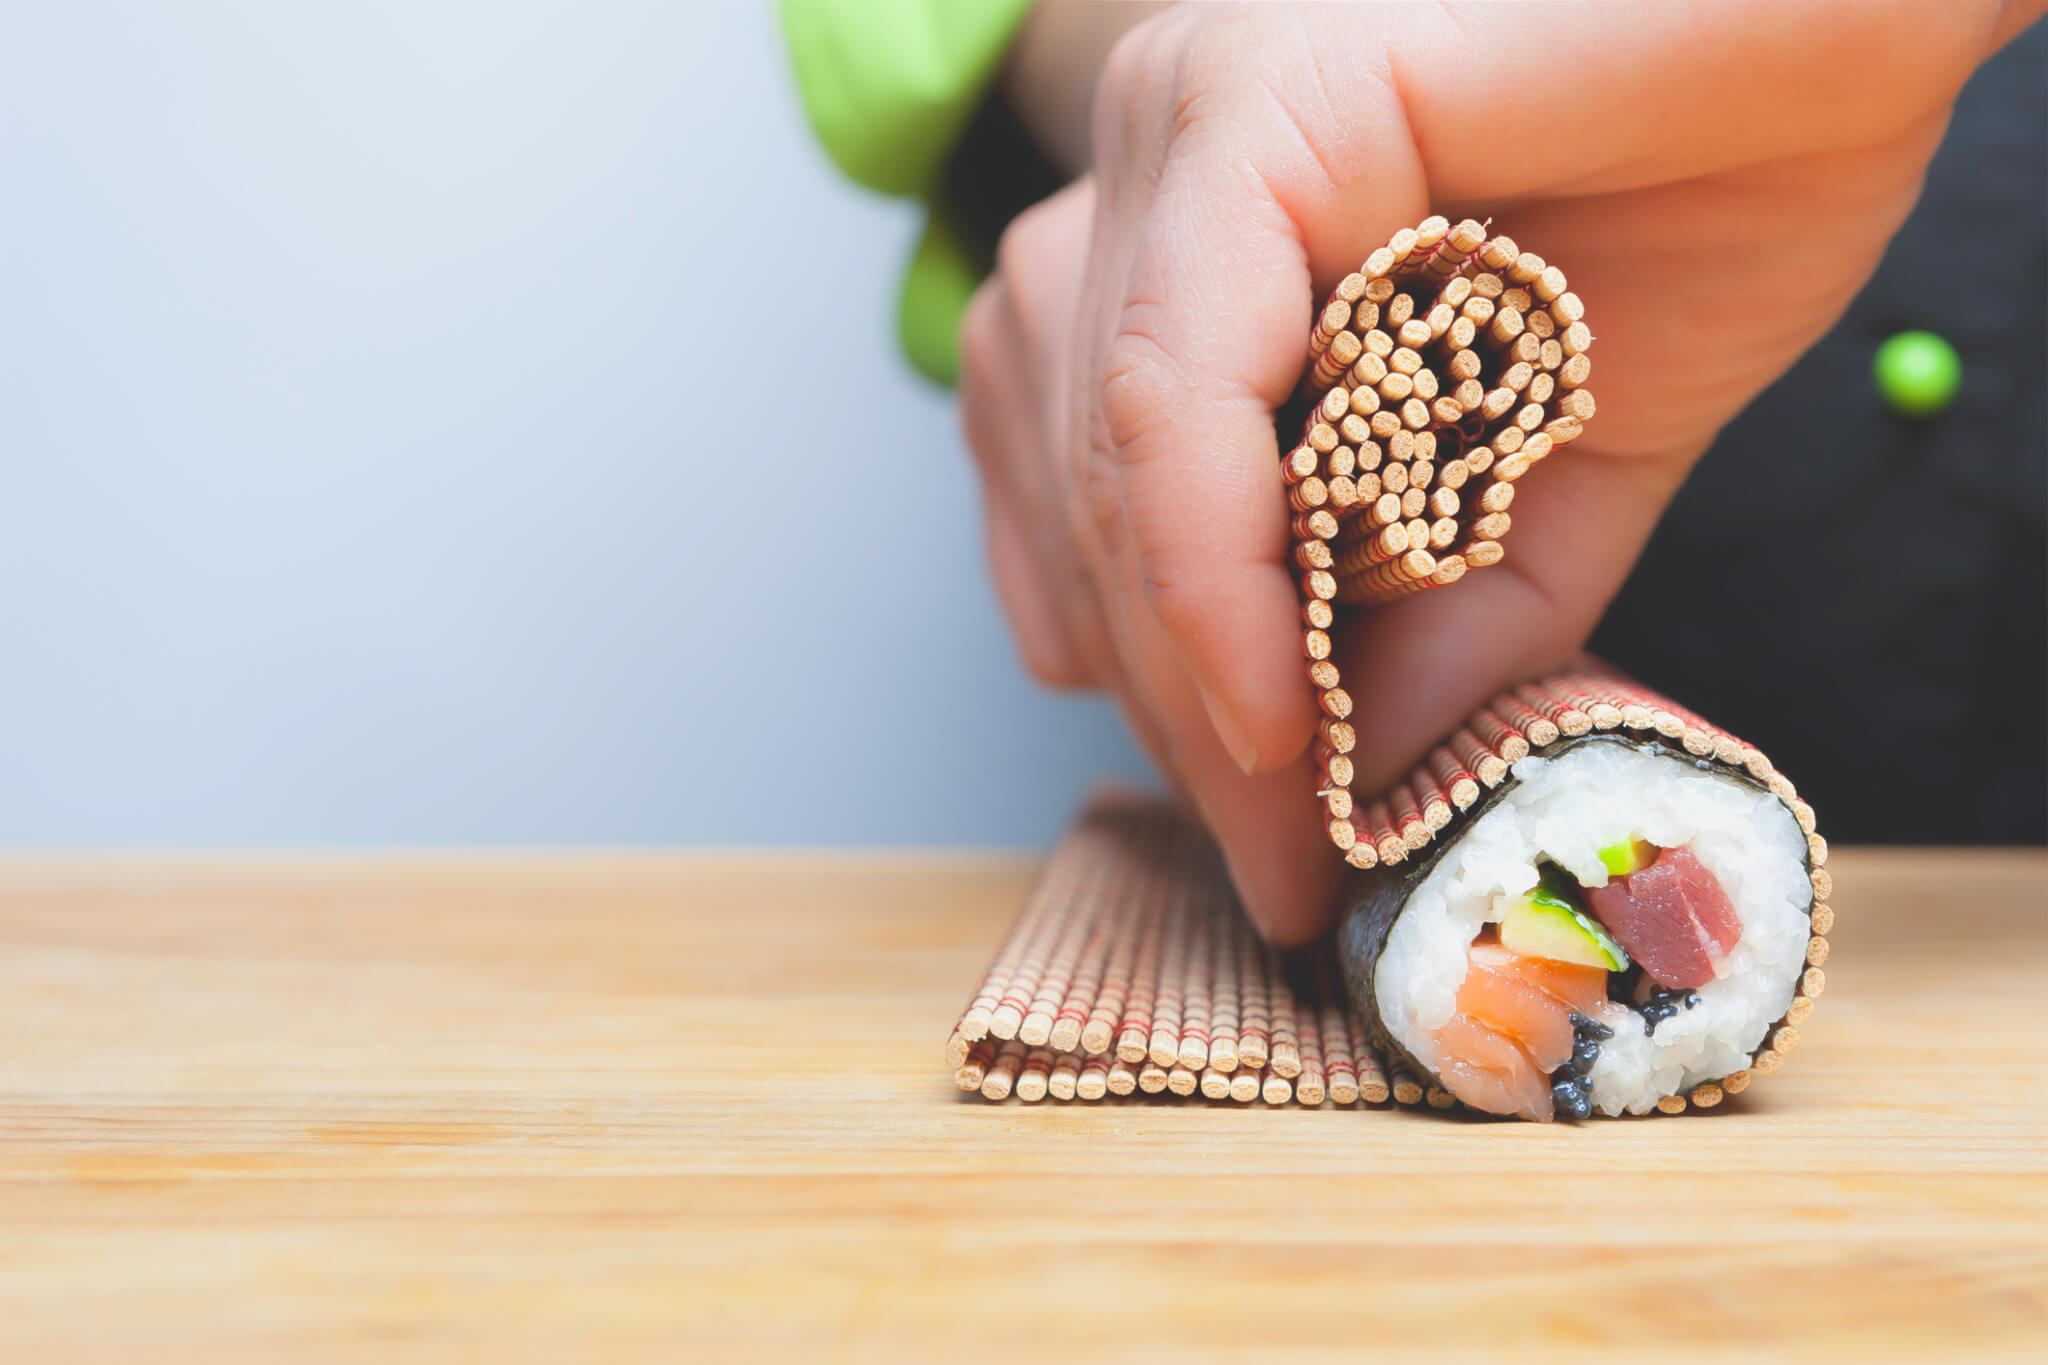 Hand Rolling Sushi with Bamboo Mat